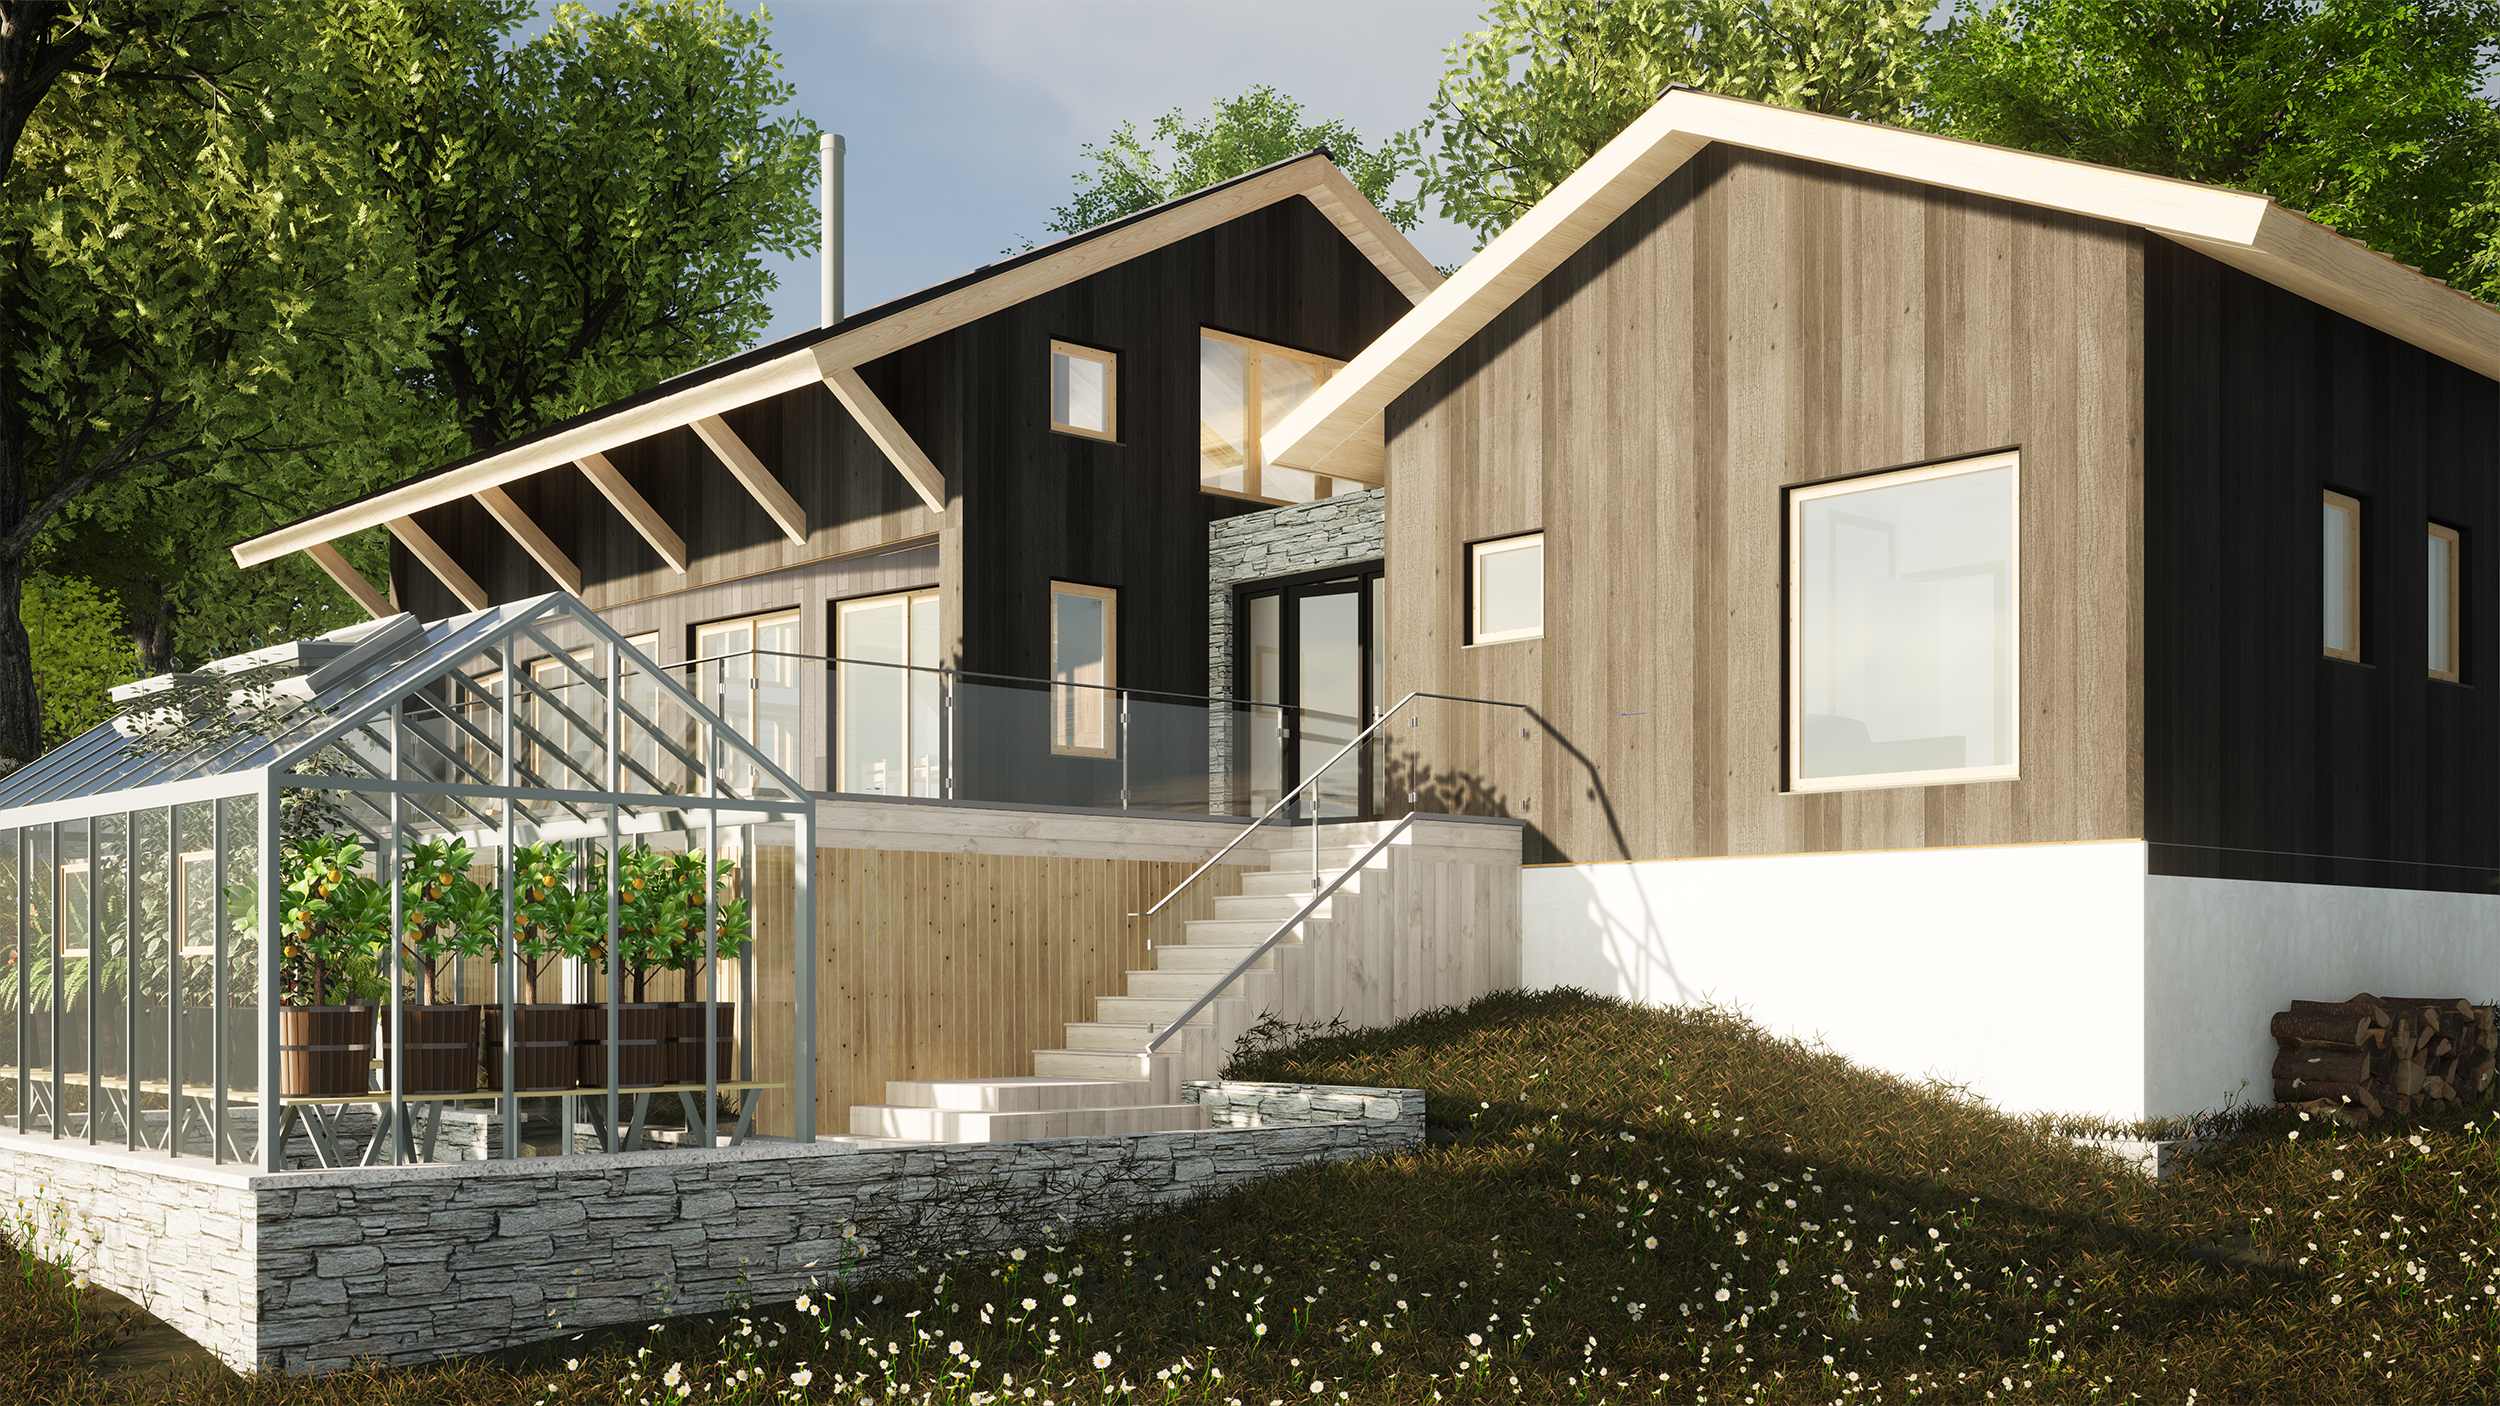  Green Homes, Green Architect, LEED Homes, Passive House, Net Zero, Sustainable, Organic, Healthy, Offgrid 